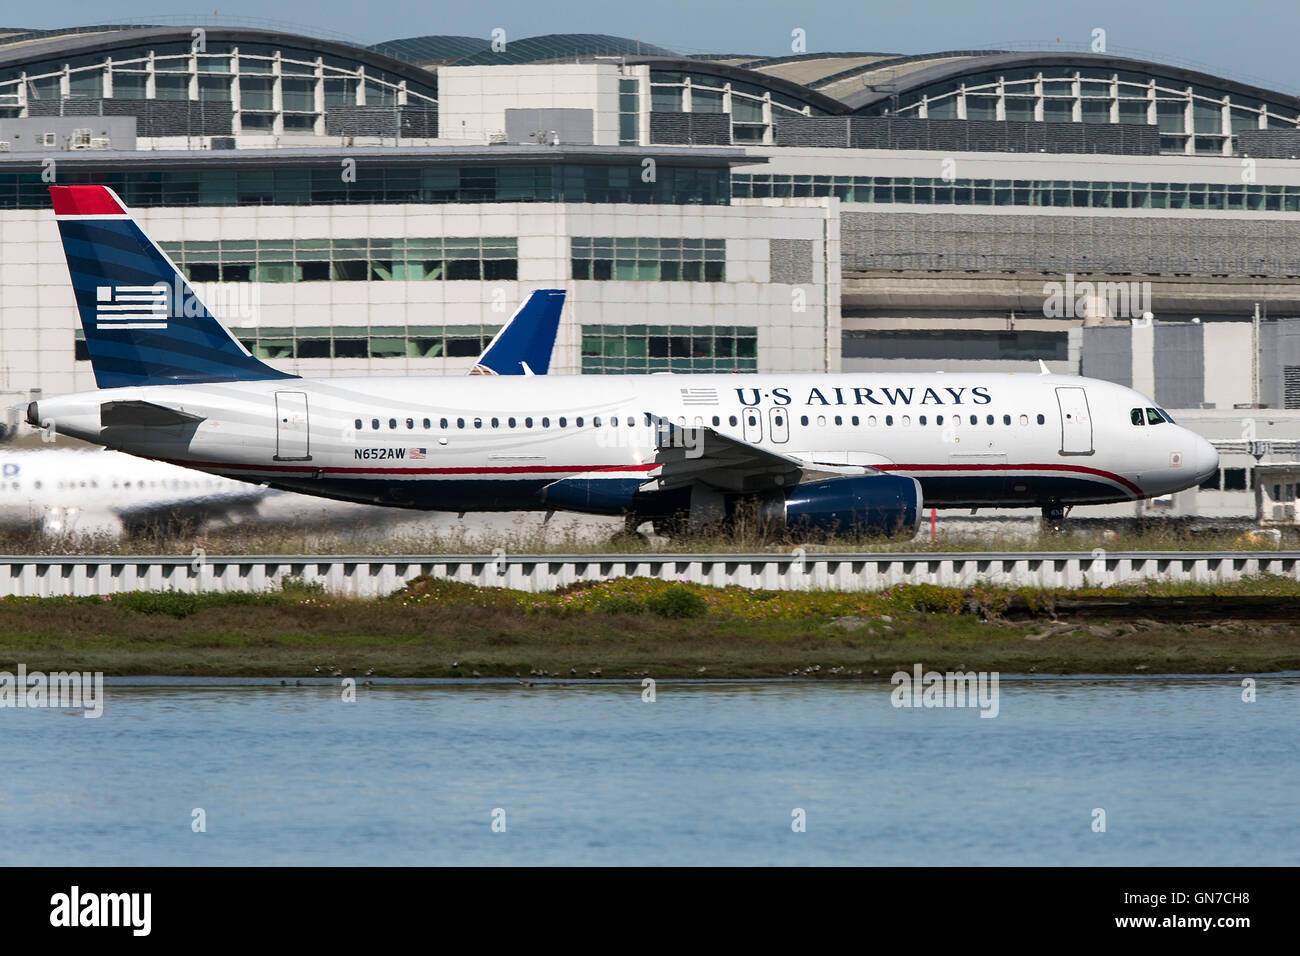 US Airways Airbus A320-232 (N652AW) on the runway before takeoff at San Francisco International Airport (SFO), Millbrae, California, United States of America Stock Photo